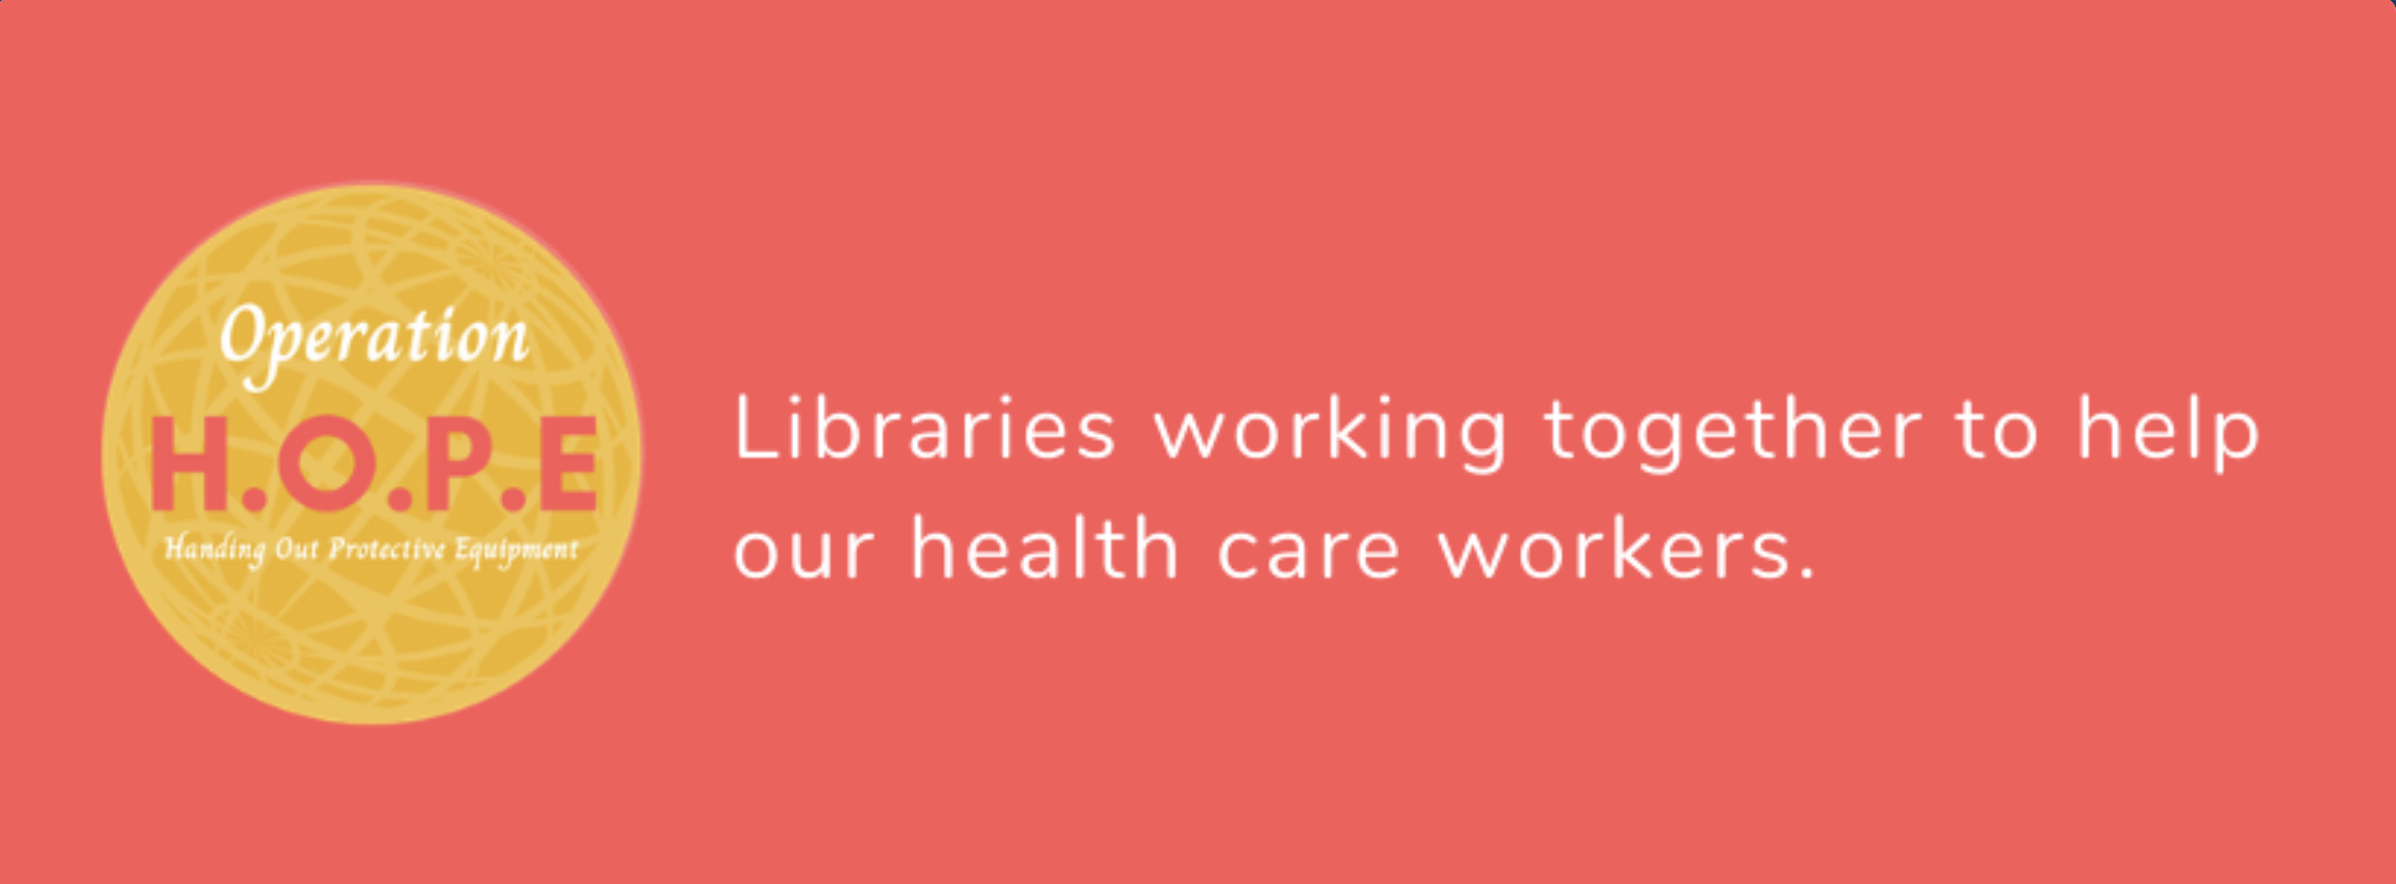 Operation HOPE: Libraries working together to help our healthcare workers